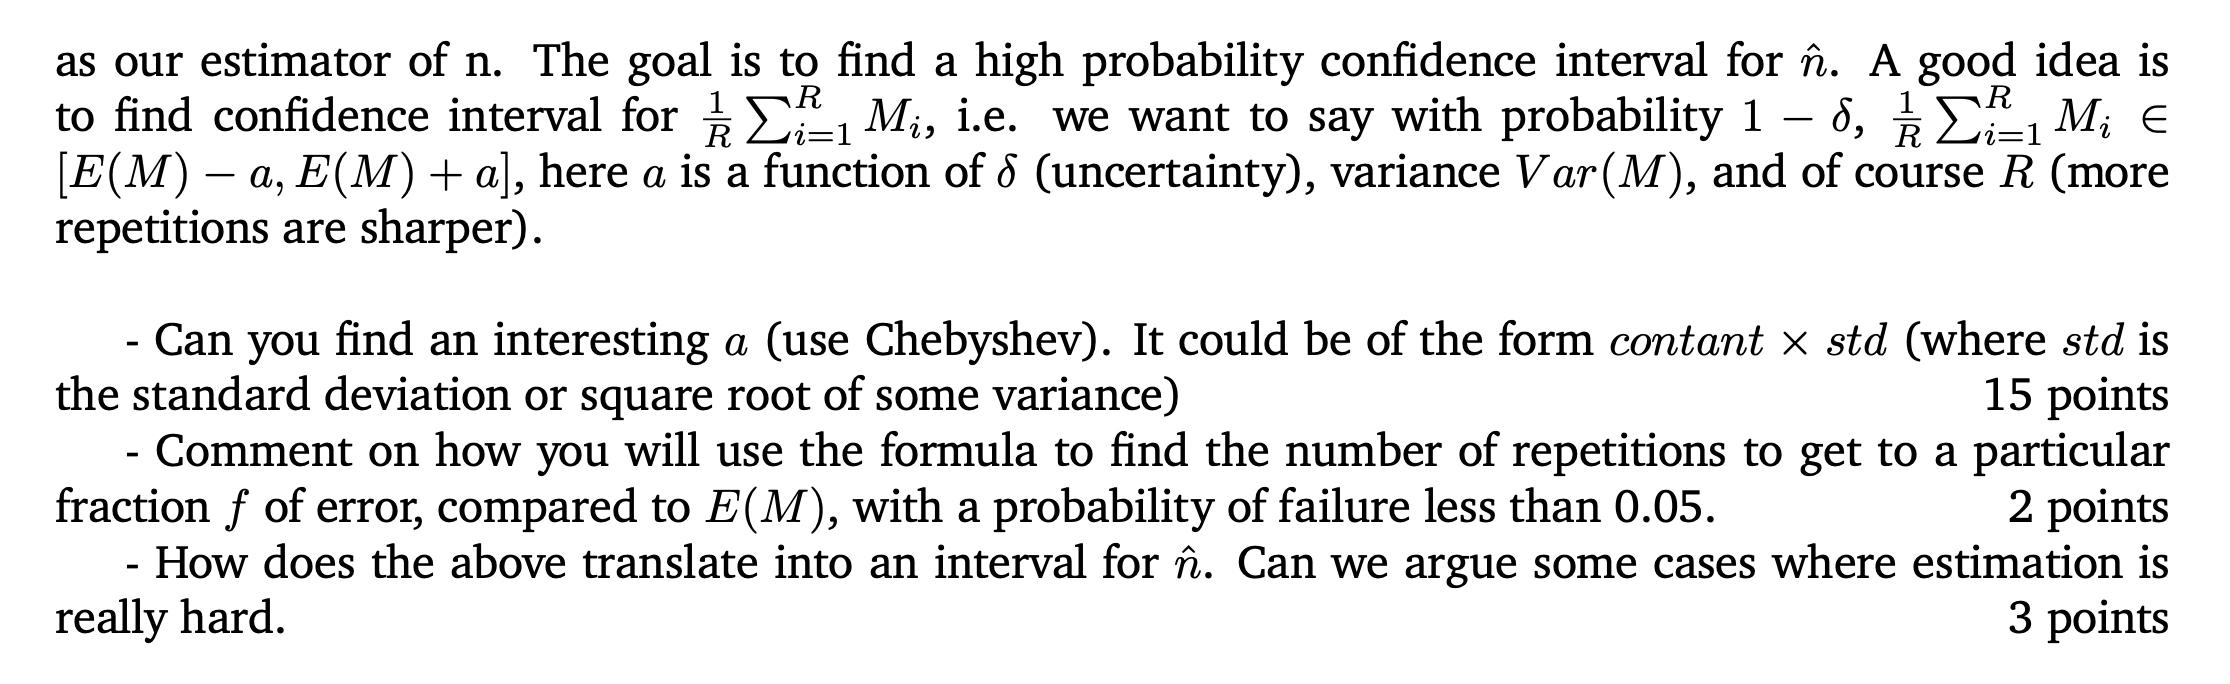 as our estimator of ( n ). The goal is to find a high probability confidence interval for ( hat{n} ). A good idea is to